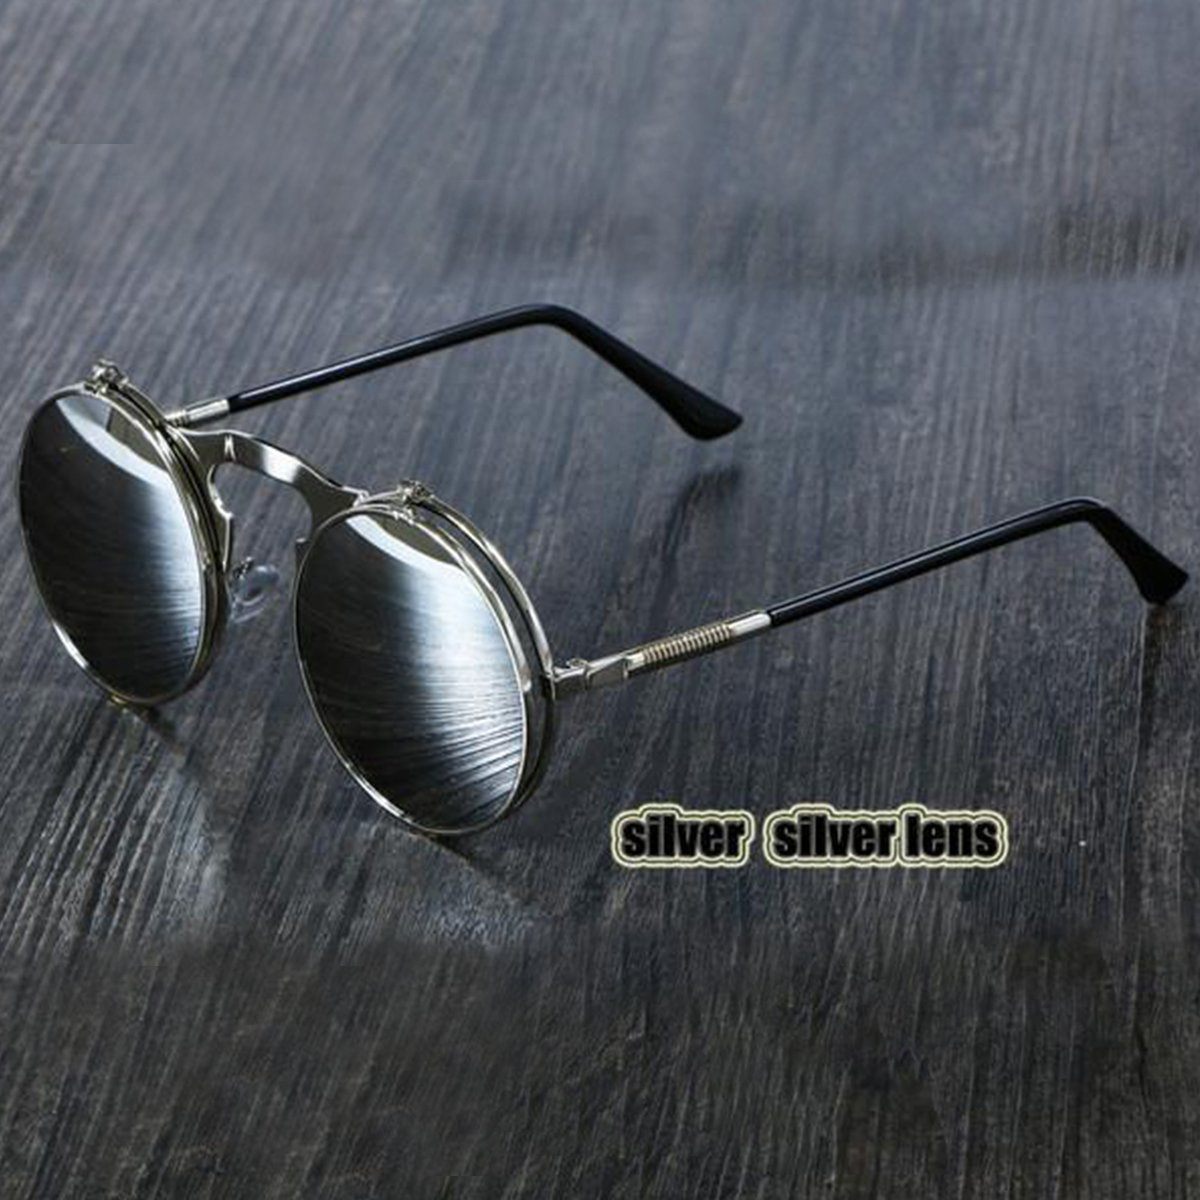 A pair of silver Steampunk Flip-Up Round Double Lens sunglasses on a wooden table.